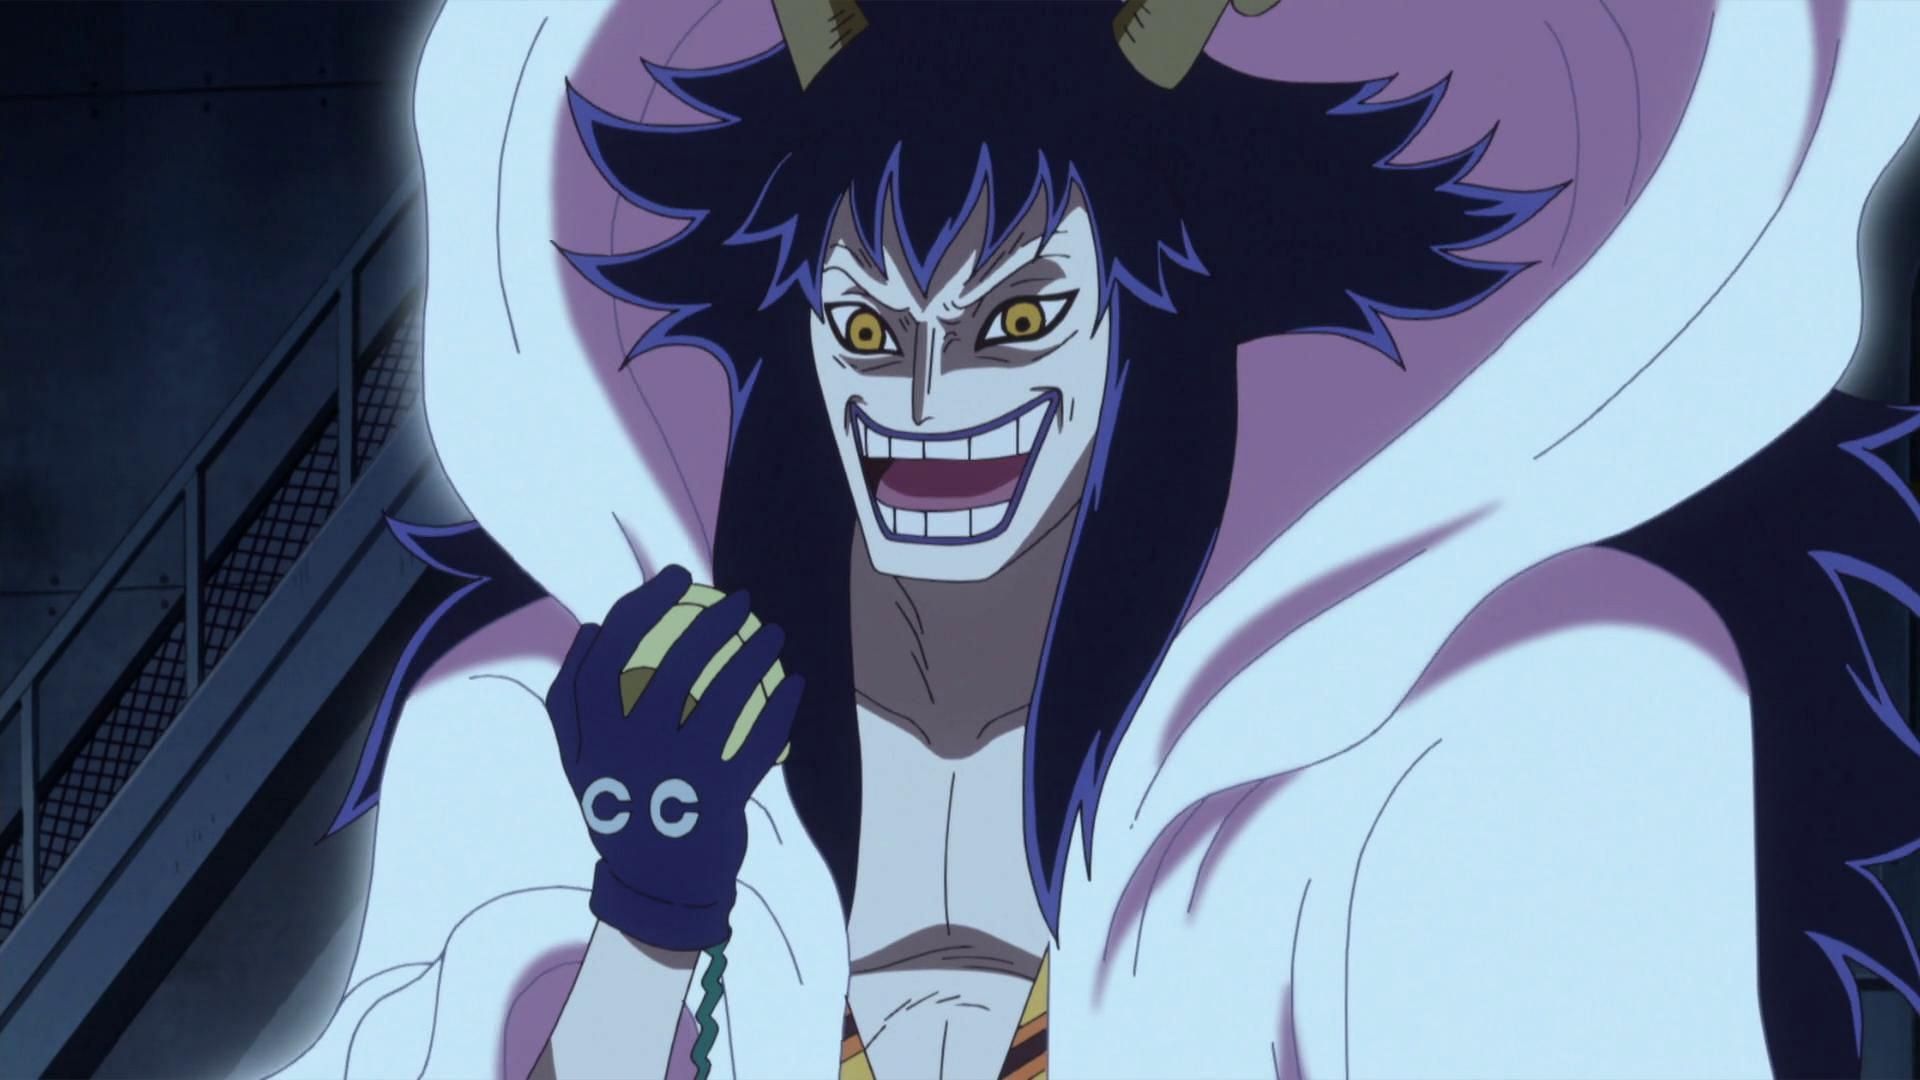 Caesar Clown as seen in One Piece (Image via Toei Animation, One Piece)